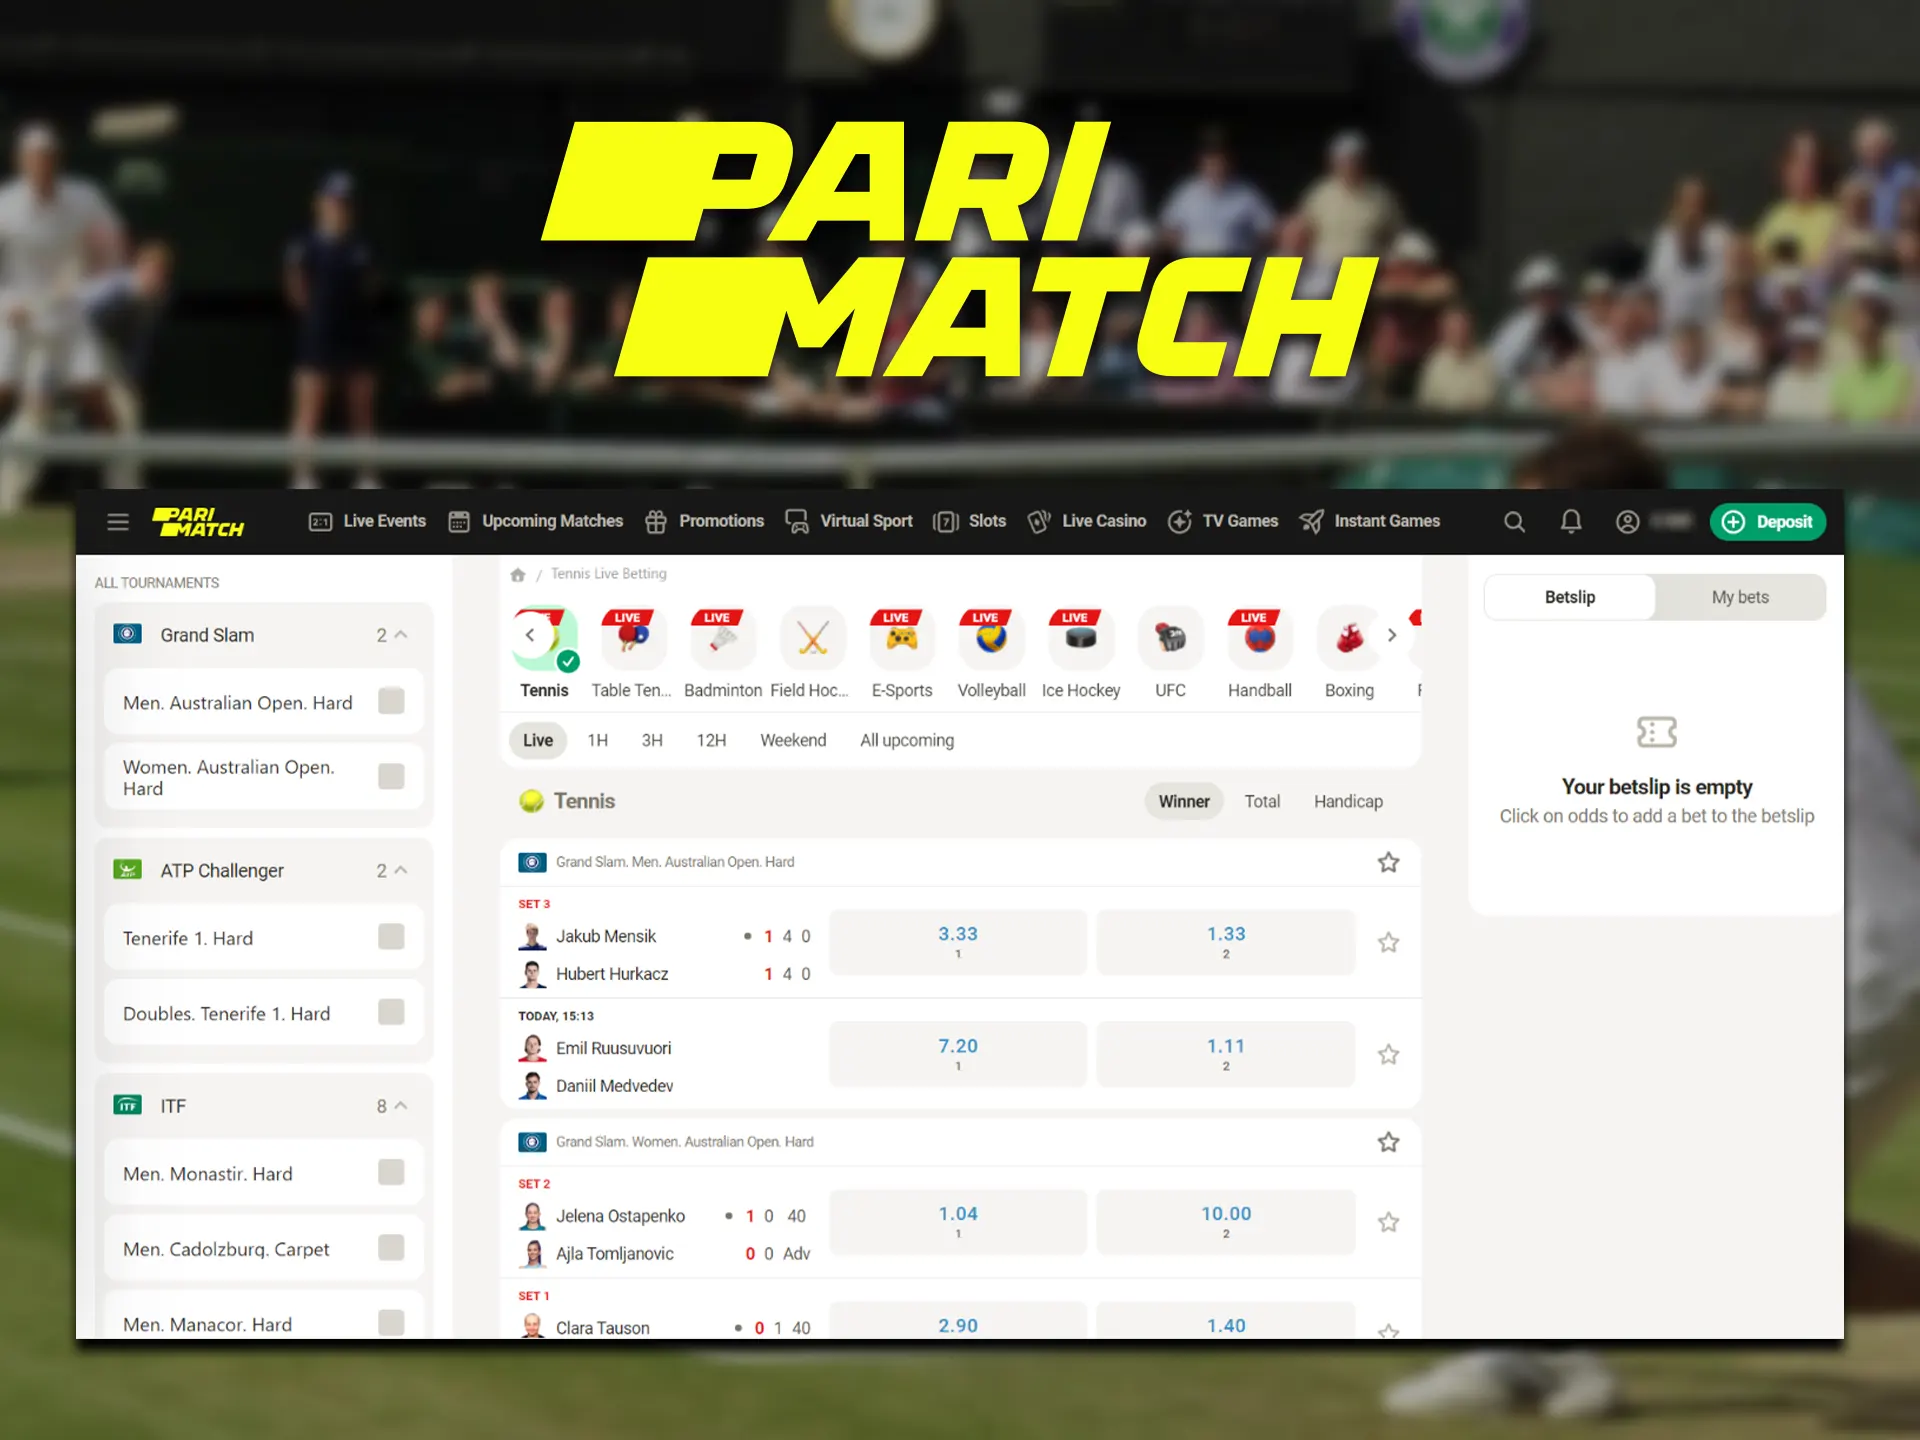 Parimatch is the most famous gaming platform with a wide range of sports to bet on.